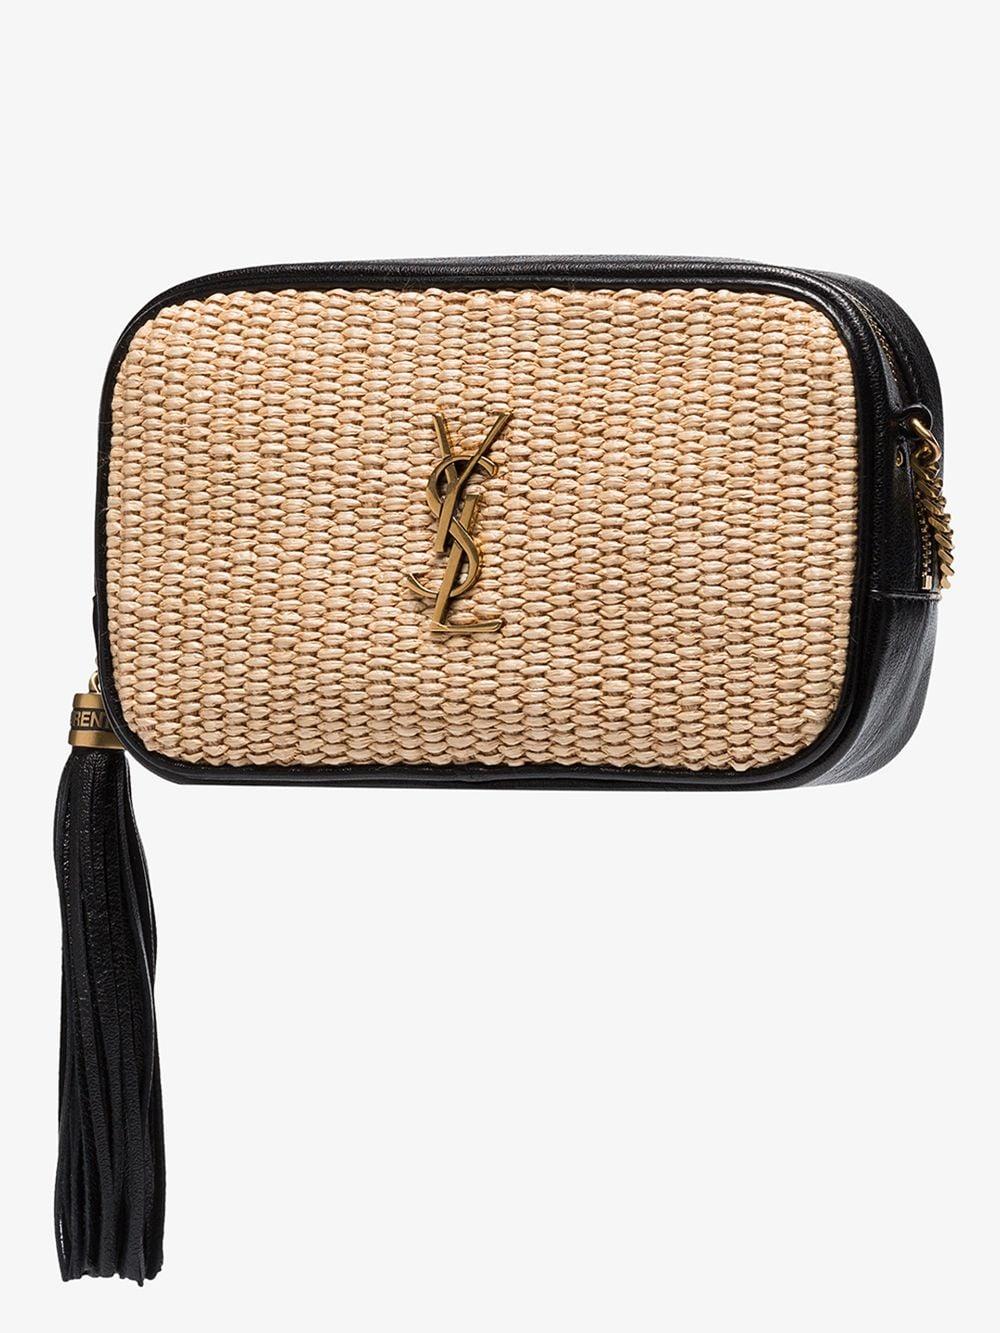 Saint Laurent Lou Mini Ysl-logo Quilted-leather Cross-body Bag in